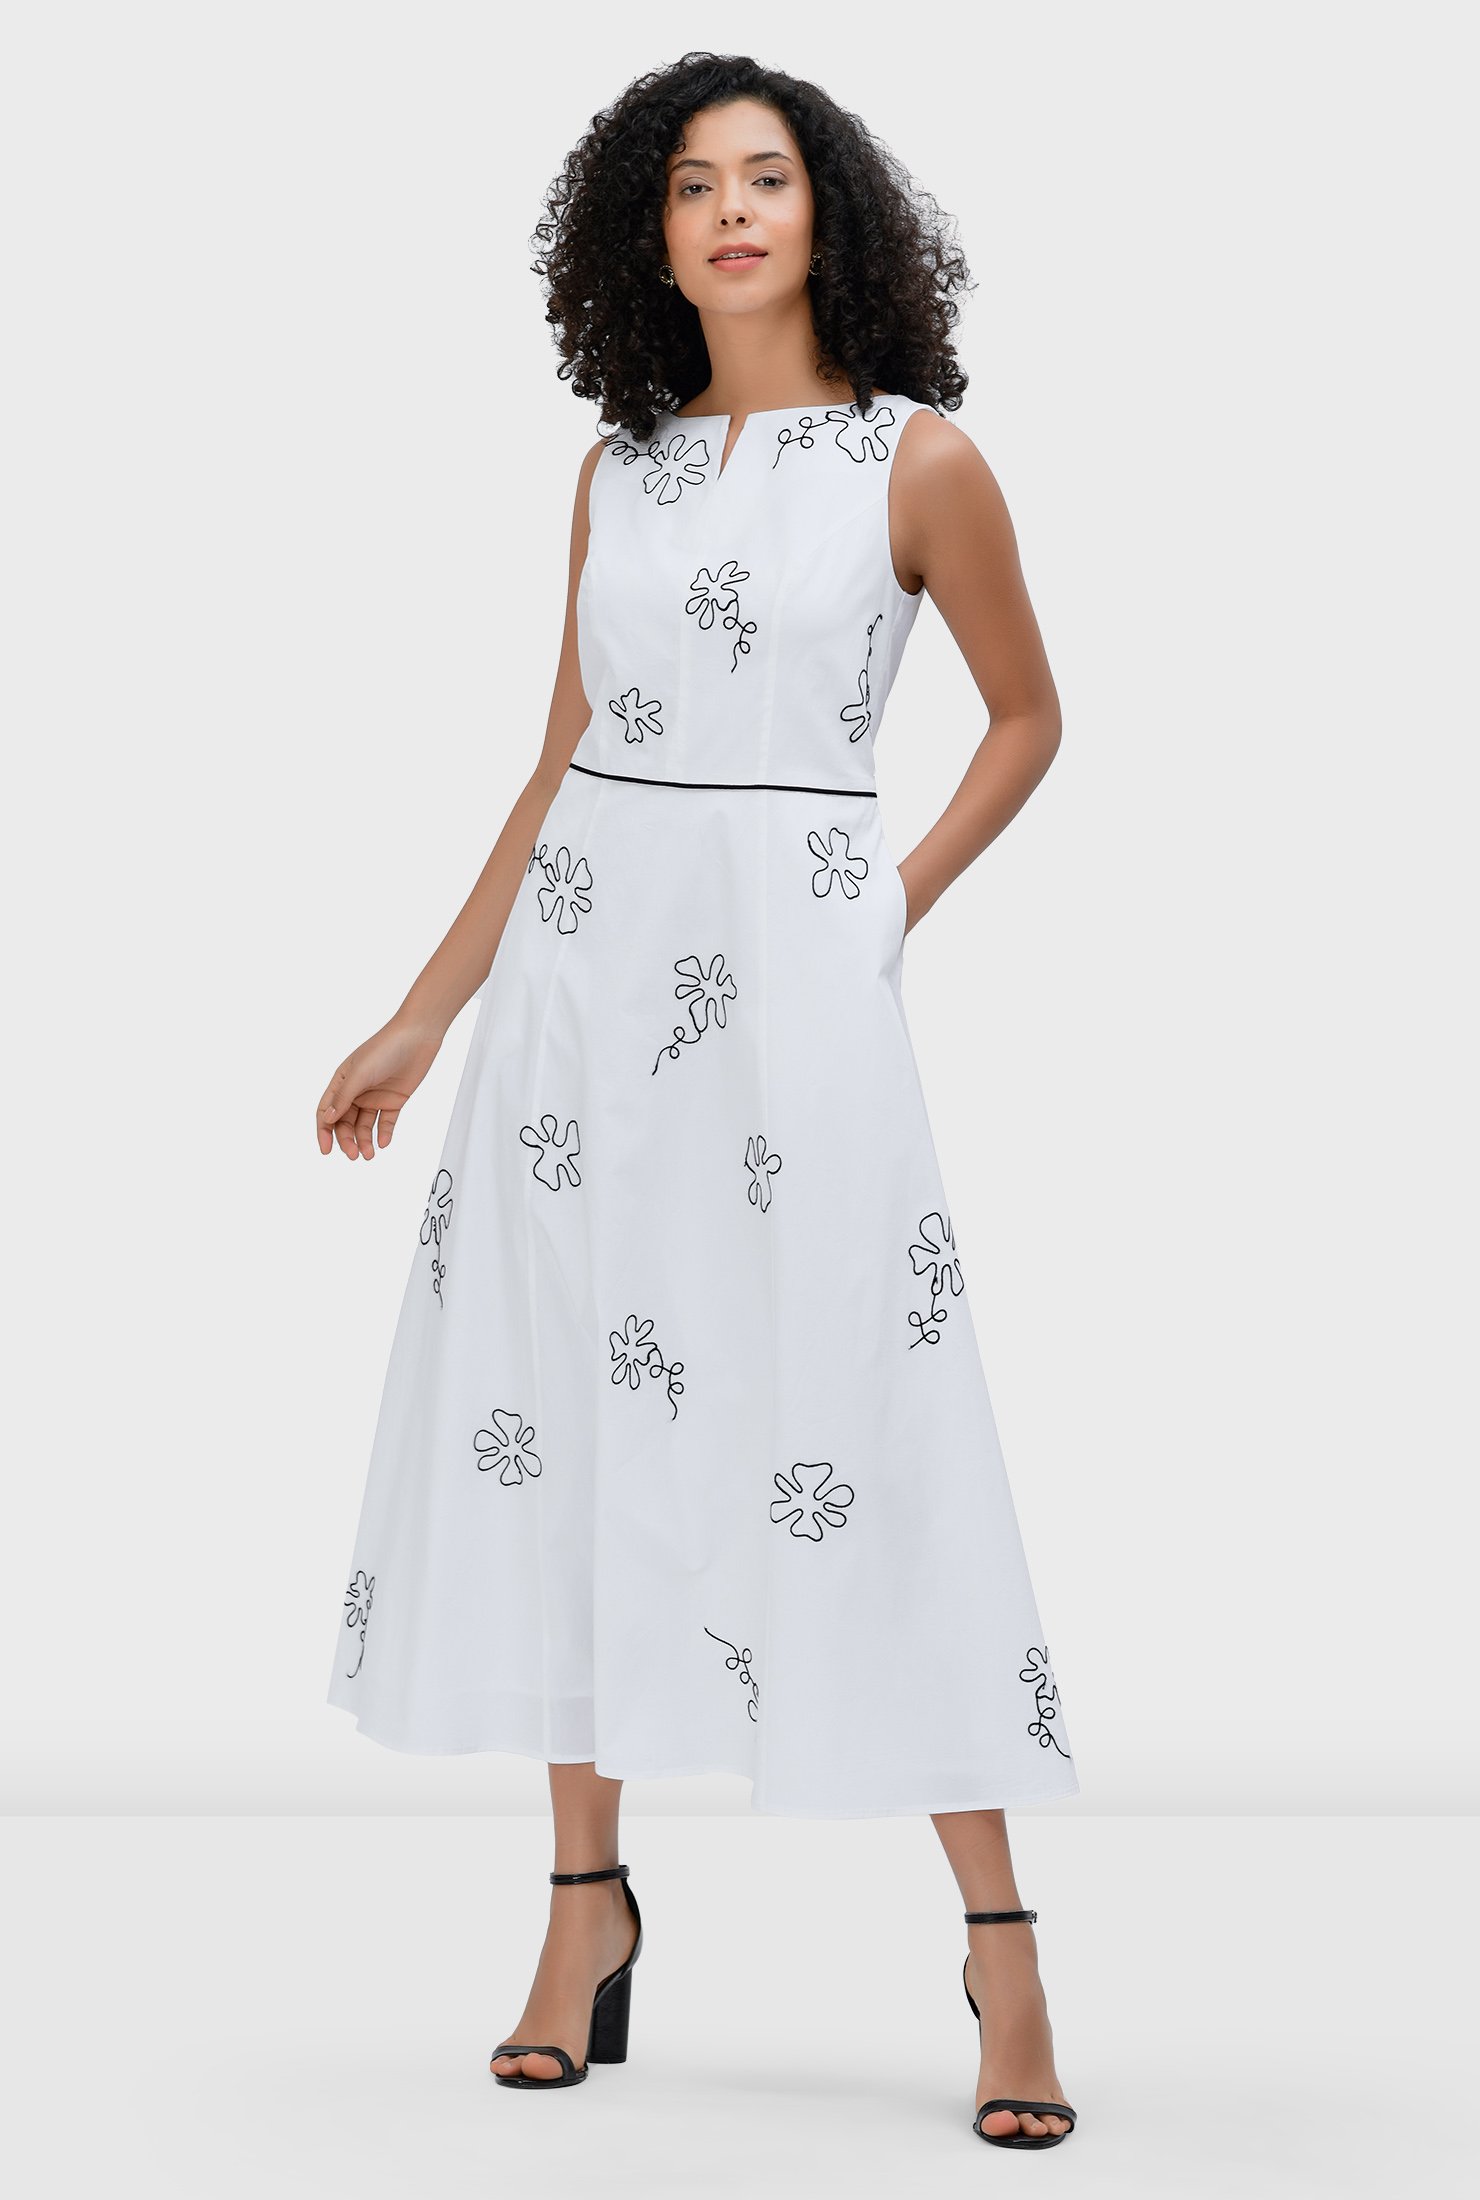 Graphic floral embroidery amps up the seventies charm of our cotton poplin dress, cut in a flattering A-line silhouette and cinched in at the contrast seamed waist atop a full flare skirt.